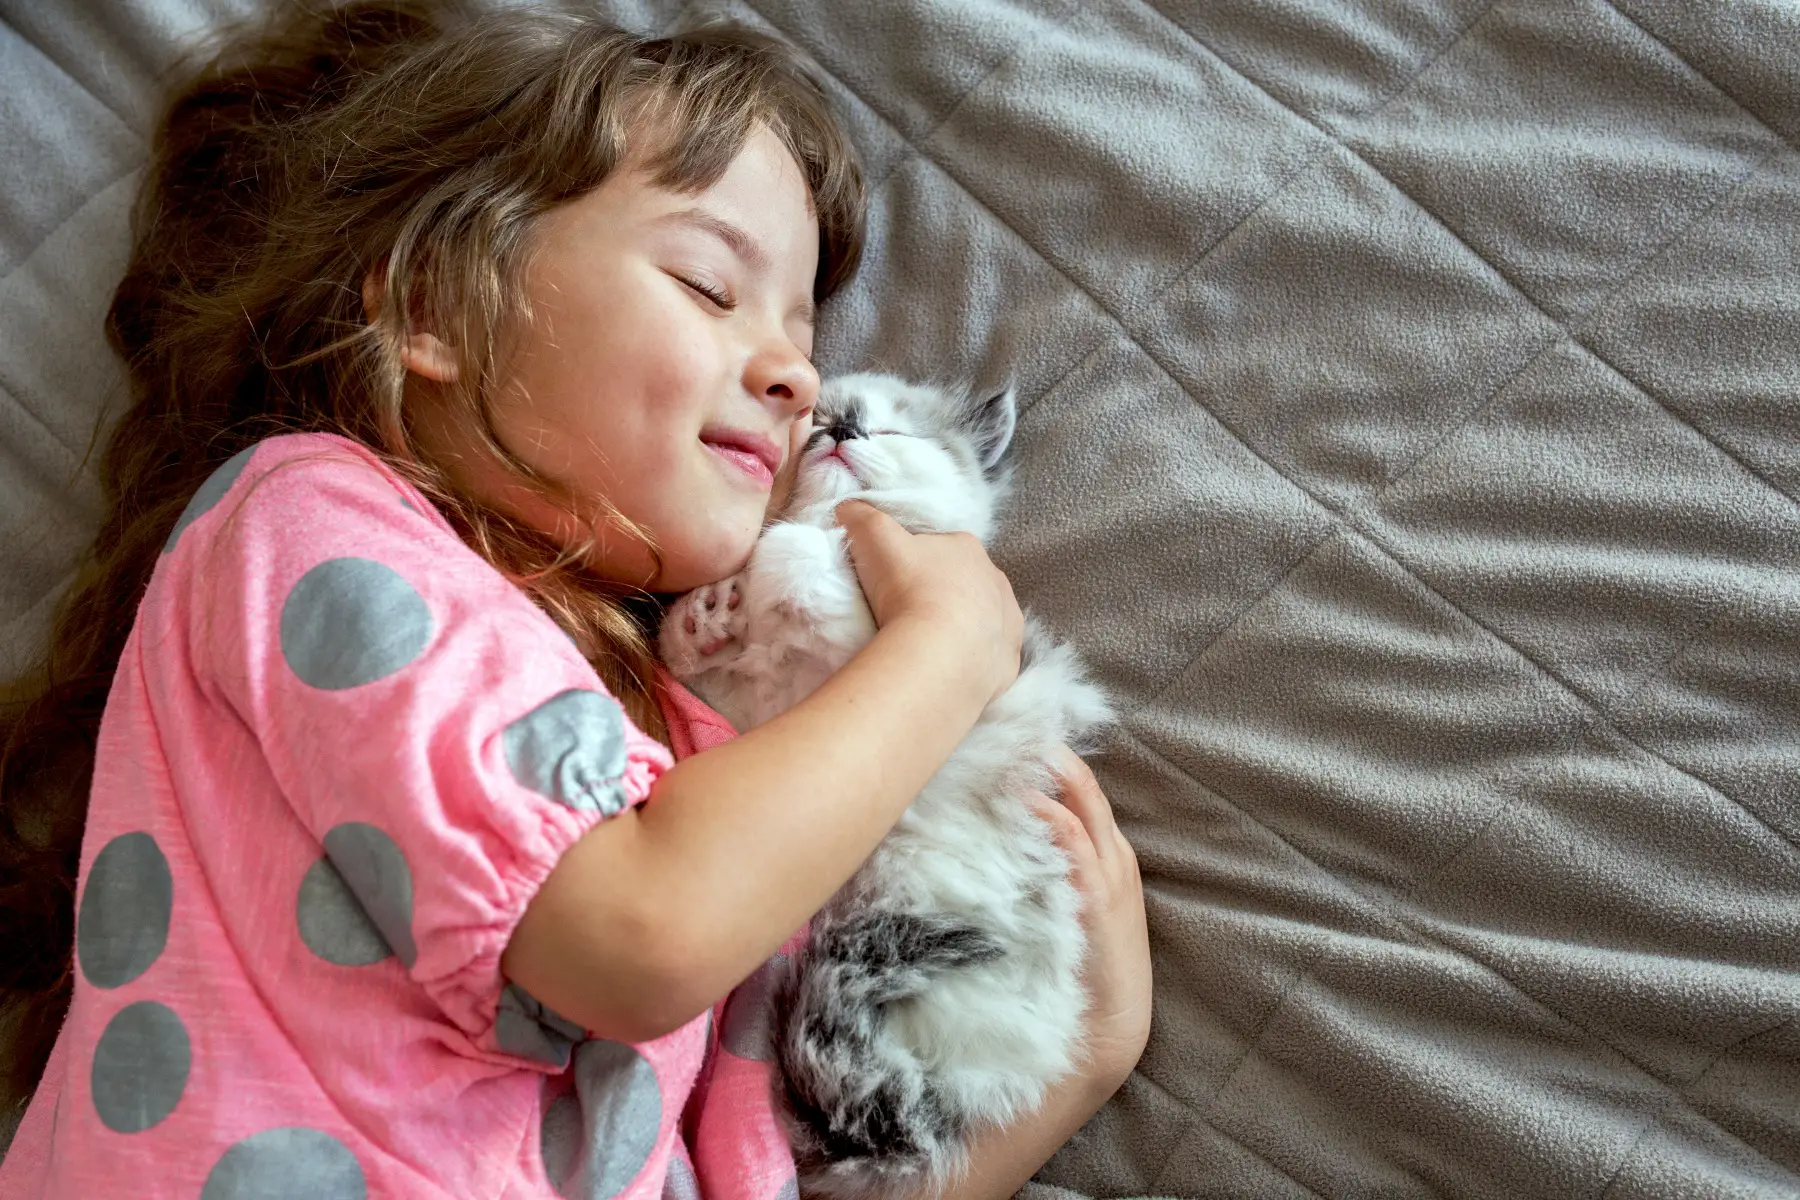 a little girl laying on a bed and cuddling a cute fluffy kitten, both have their eyes closed and seem happy